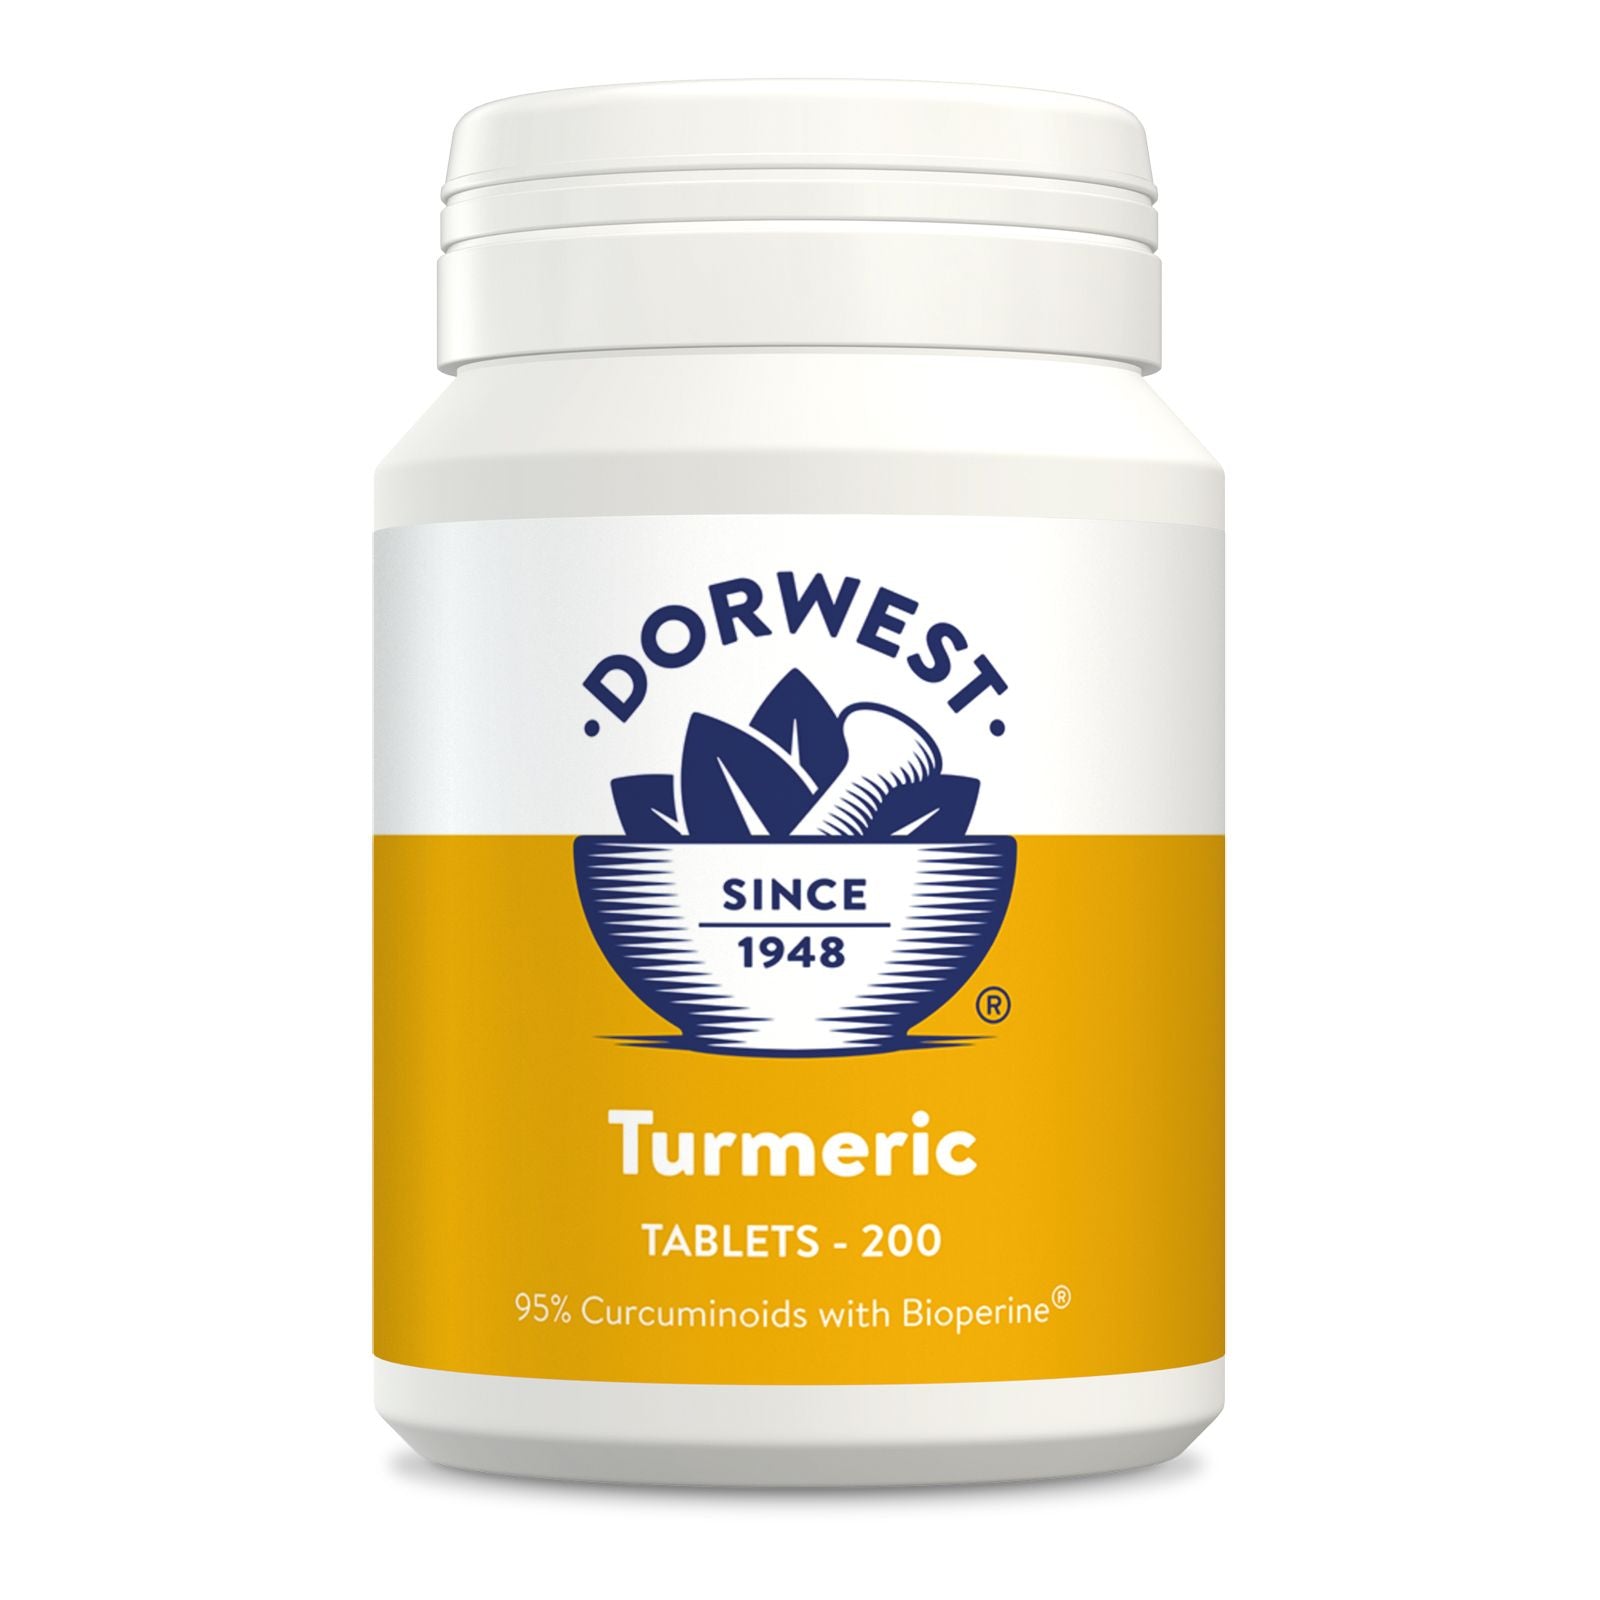 Dorwest Turmeric Tablets For Dogs & Cats